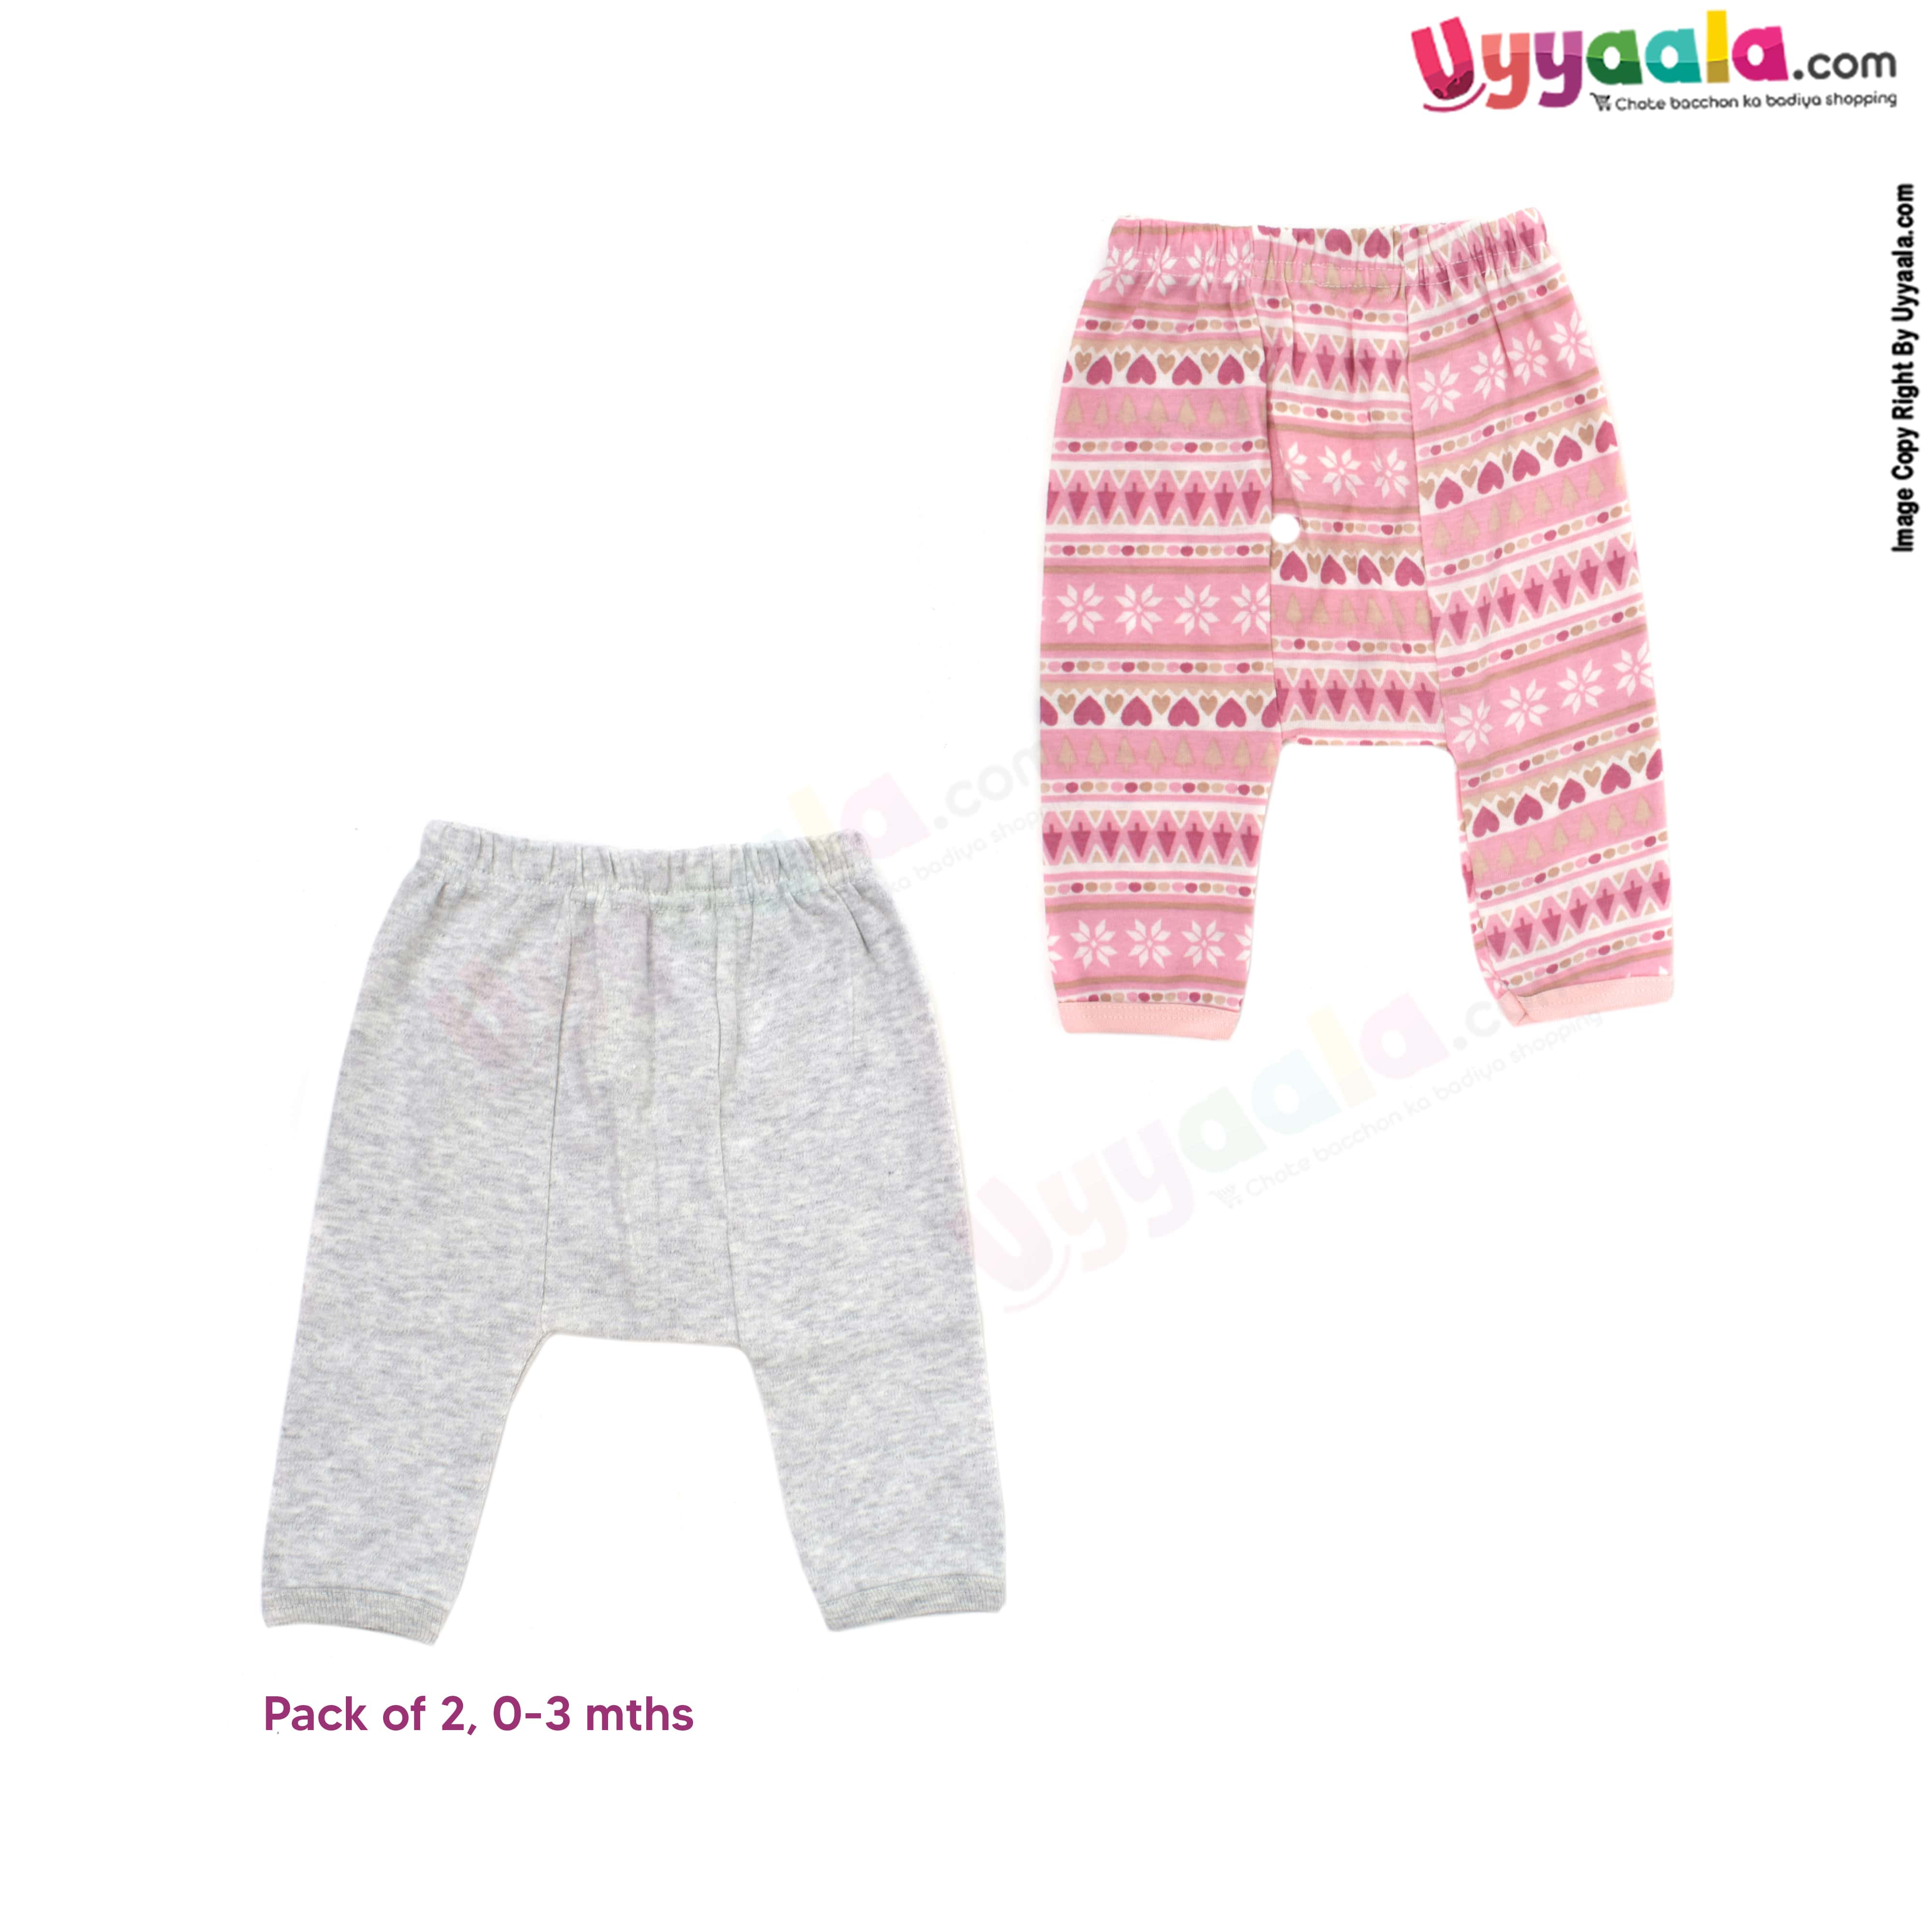 PRECIOUS ONE diaper pants 100% soft hosiery cotton pack of 2 - gray & pink with assorted prints (0-3m)